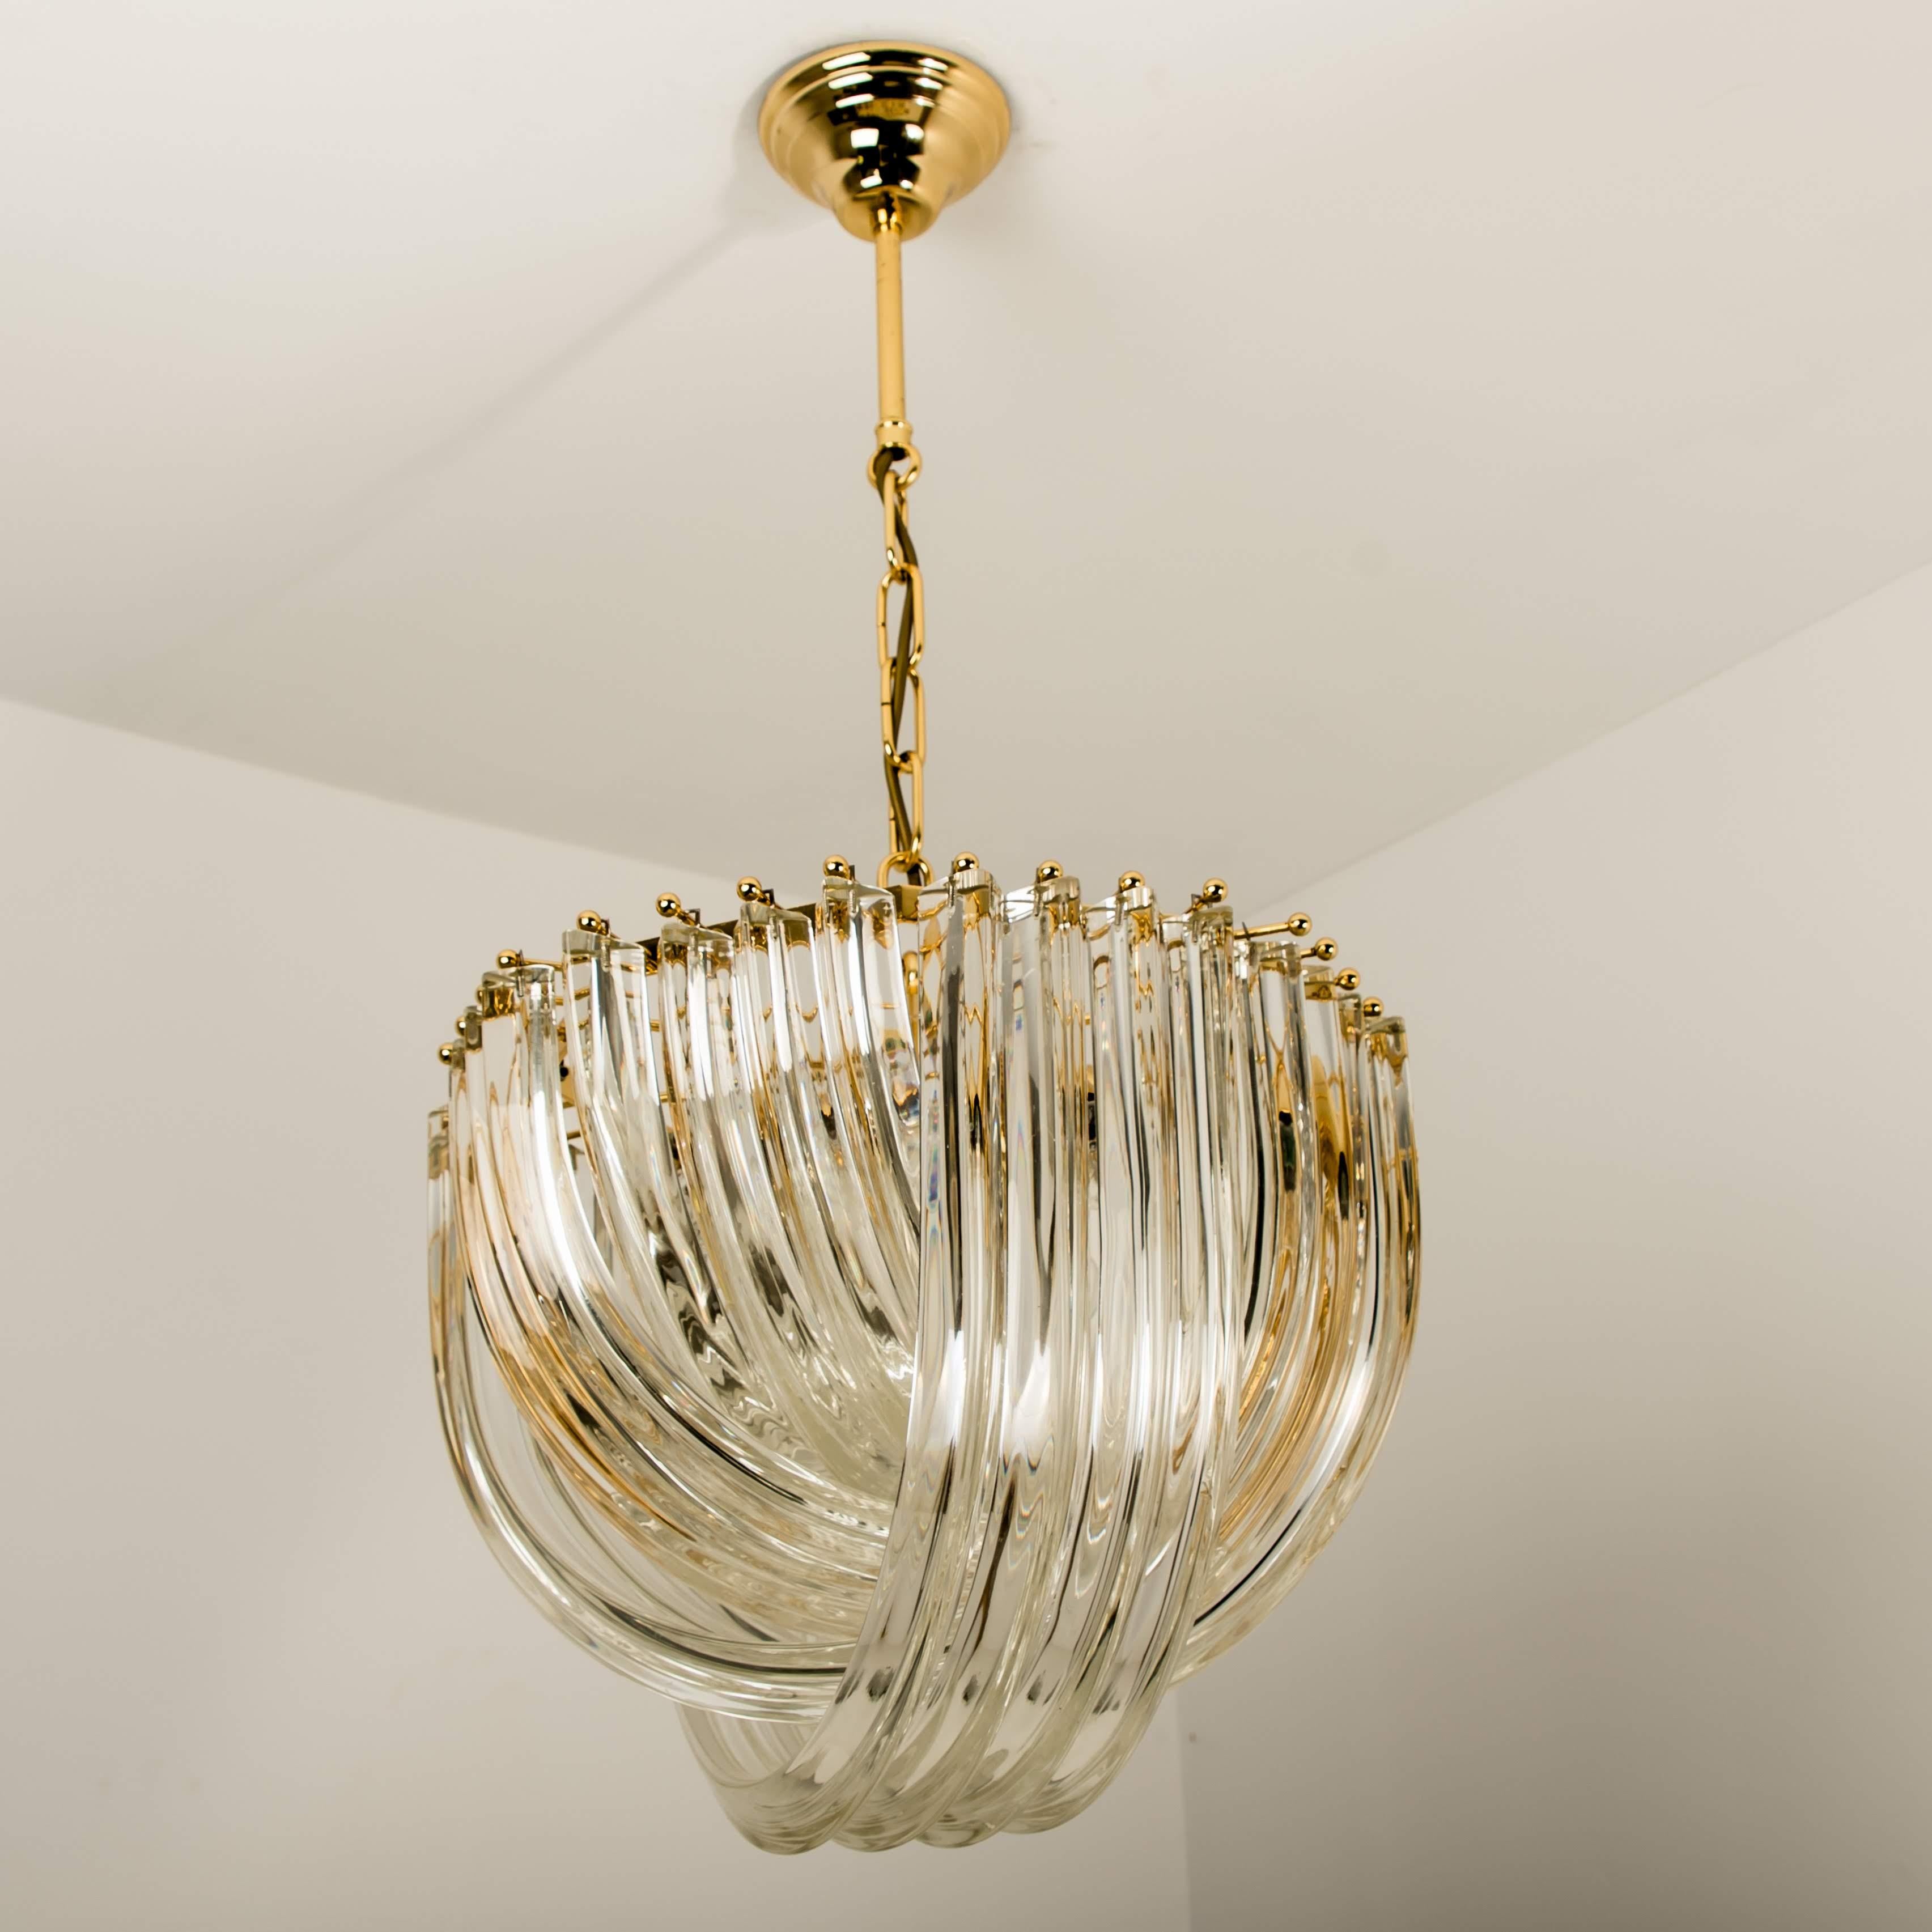 Pair of Venini Light Fixtures, Curved Crystal Glass and Gilt Brass, Italy 1